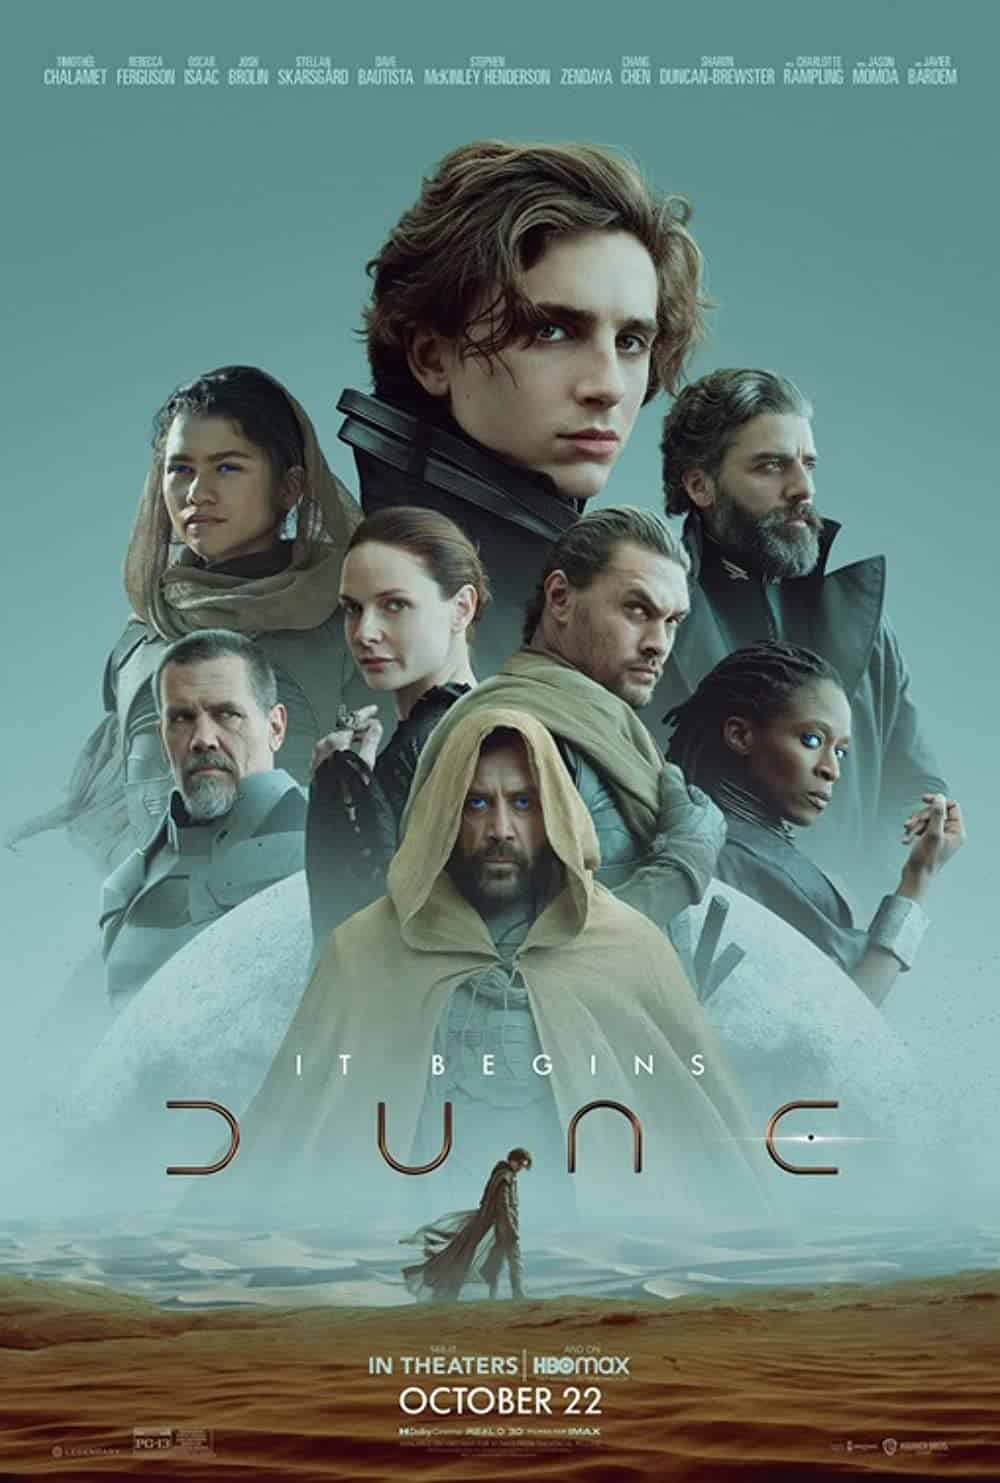 list of Avatar movies in order Dune (2021)